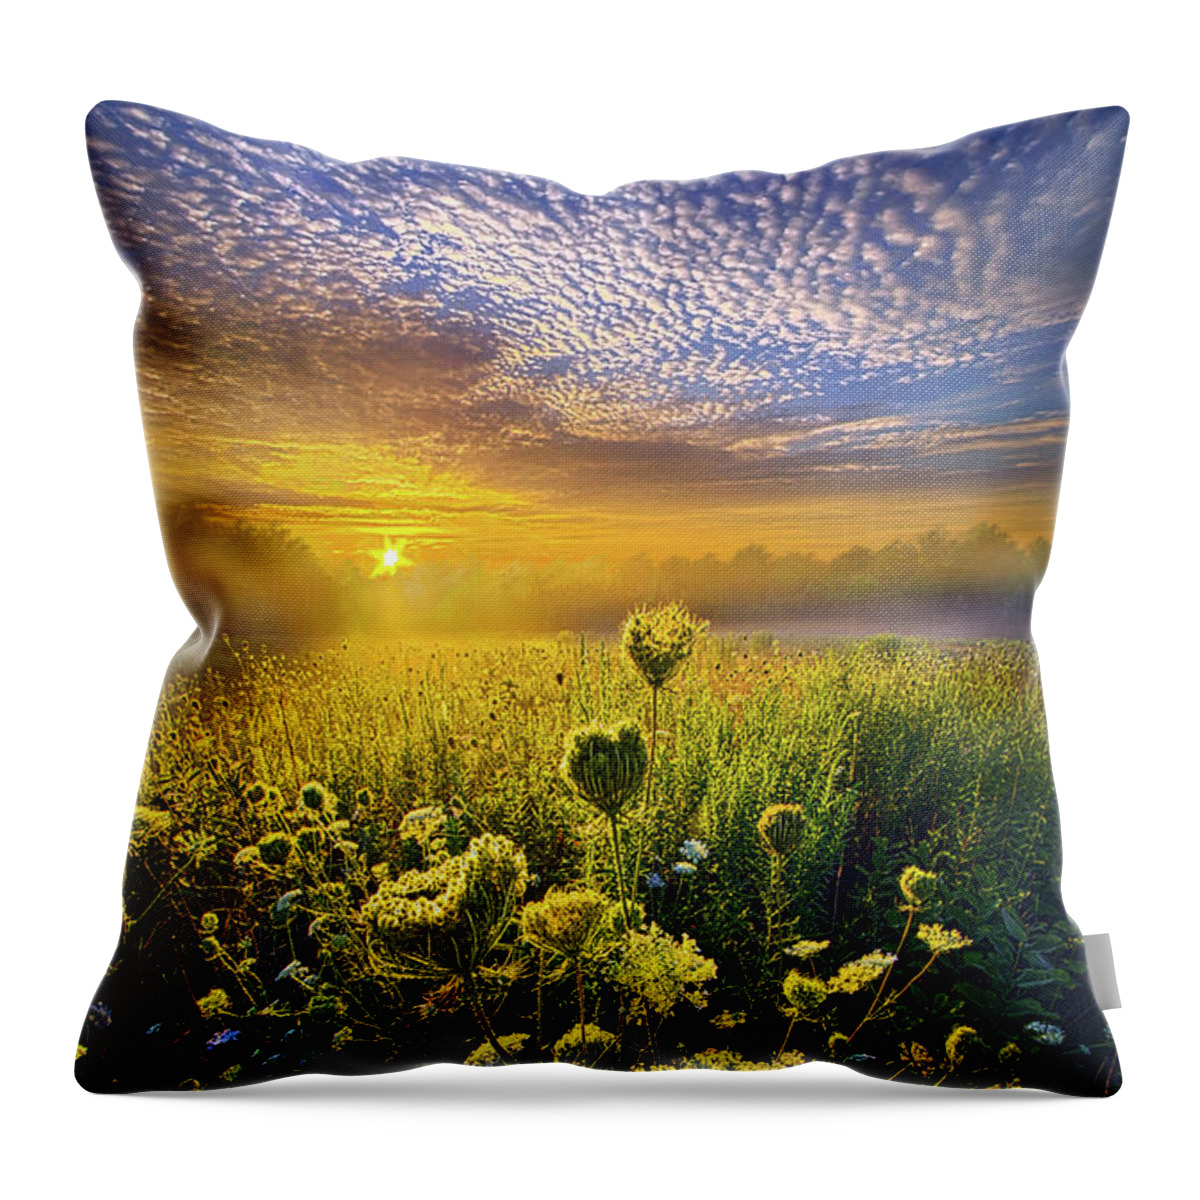 Summer Throw Pillow featuring the photograph We Shall Be Free by Phil Koch